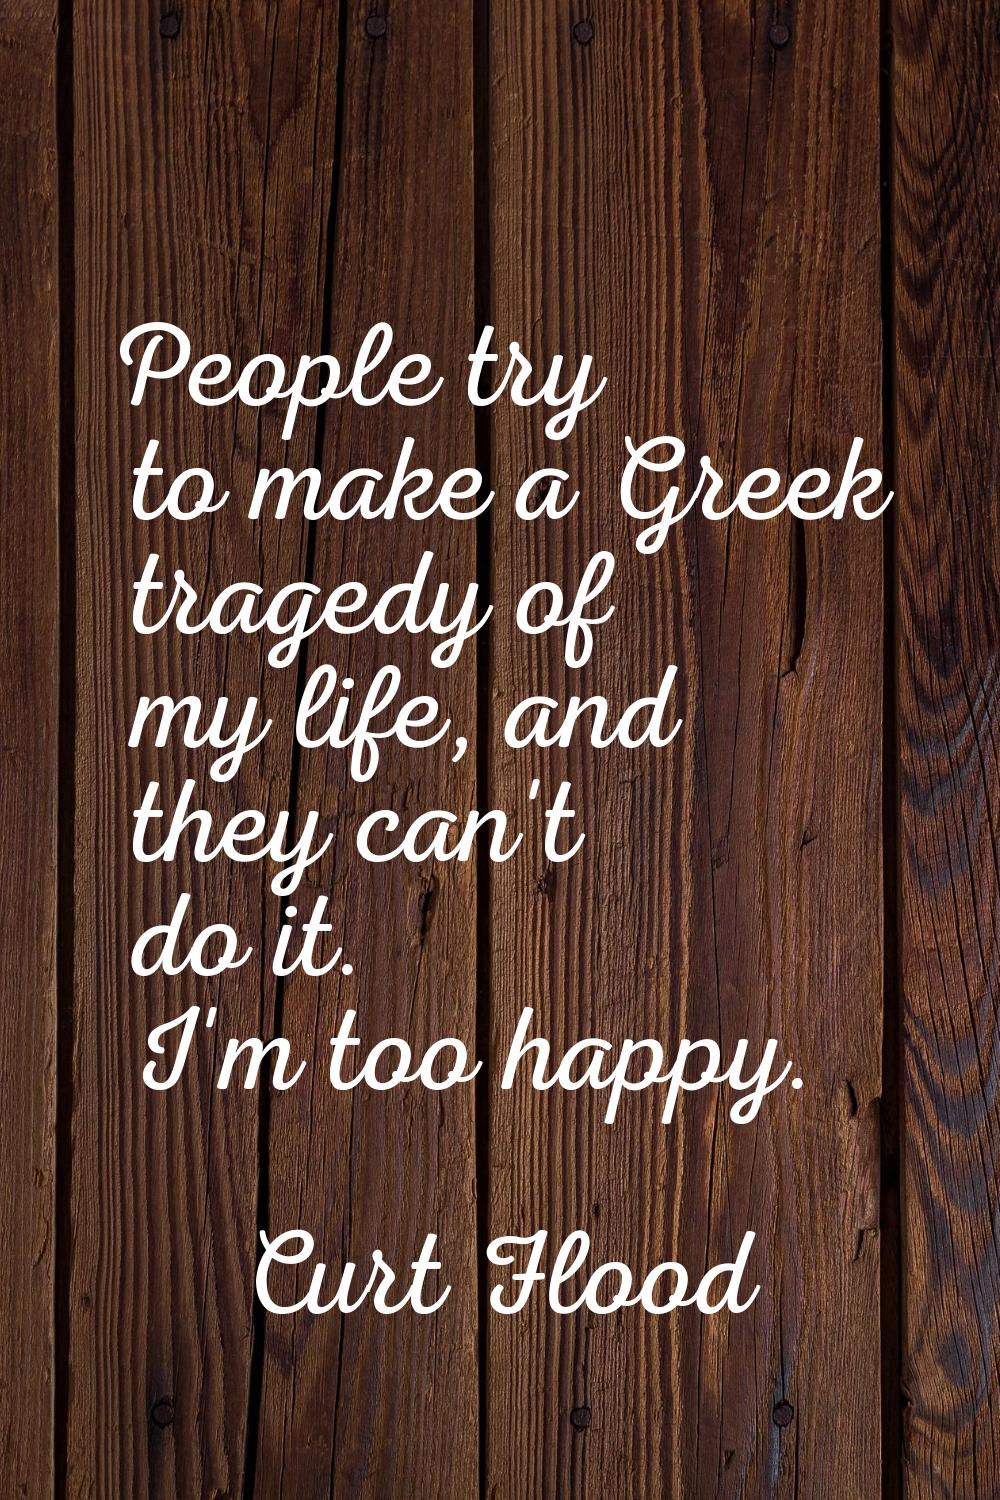 People try to make a Greek tragedy of my life, and they can't do it. I'm too happy.